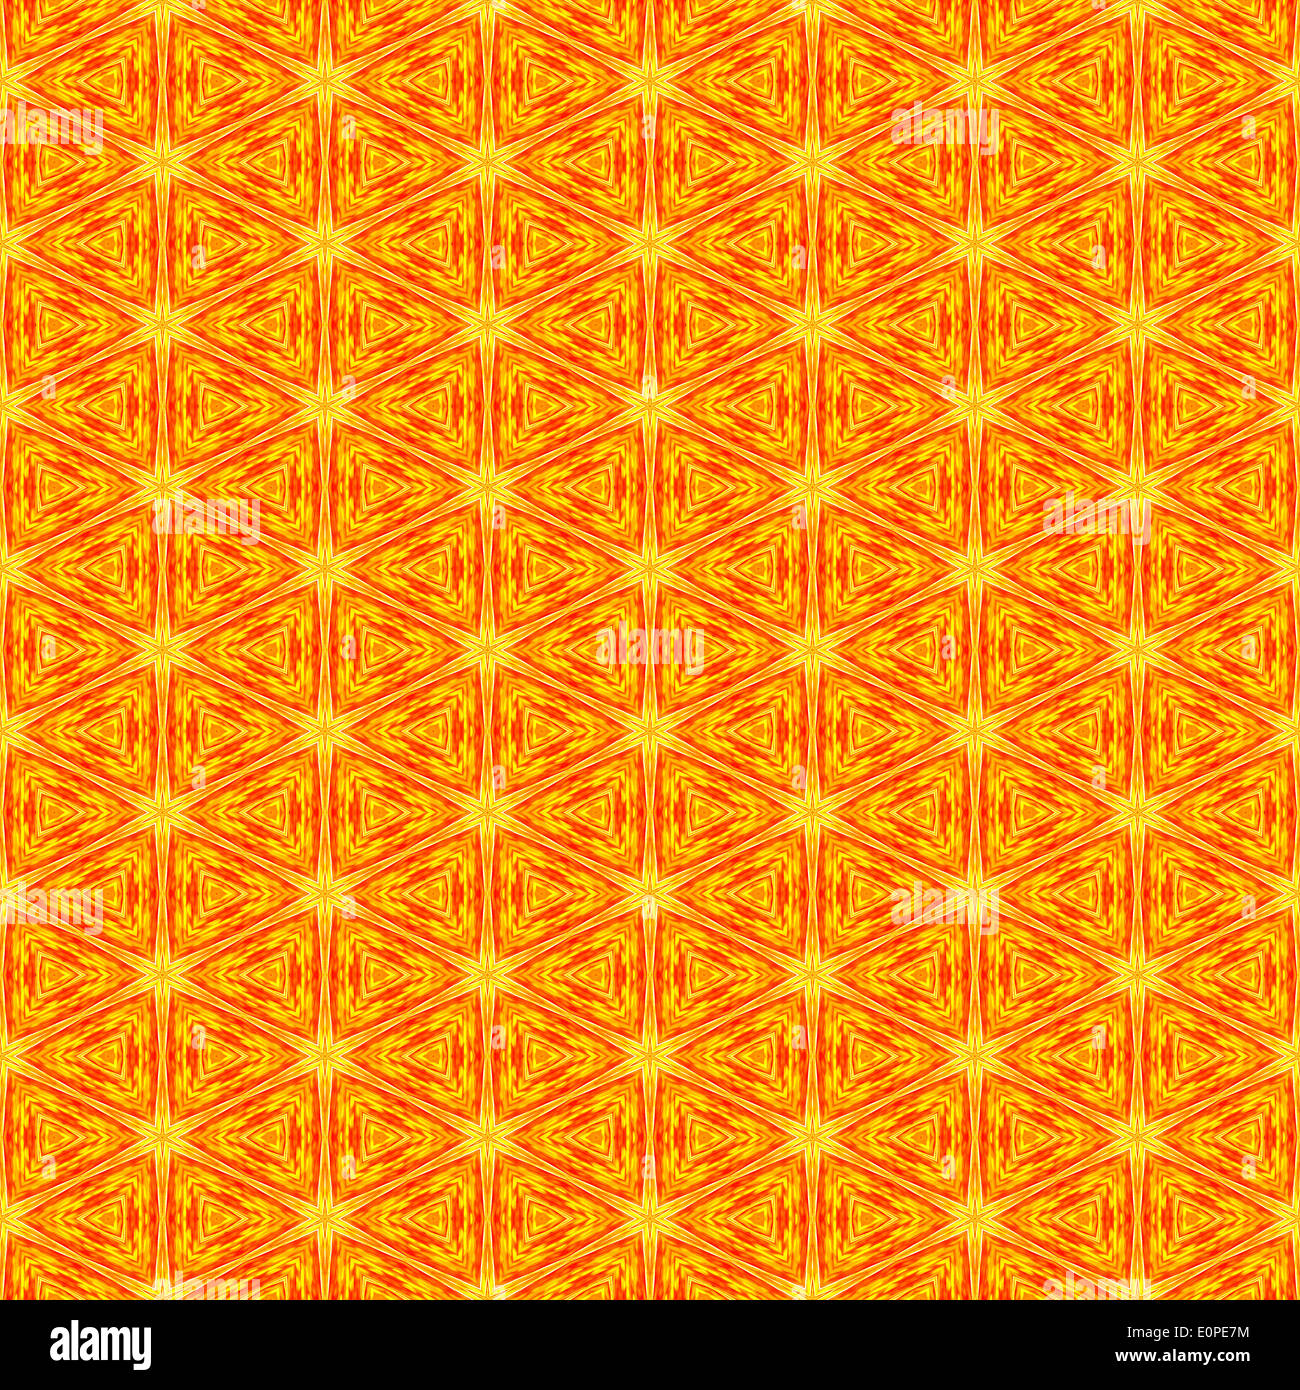 Golden stars pattern - seamless, repetitive background Stock Photo